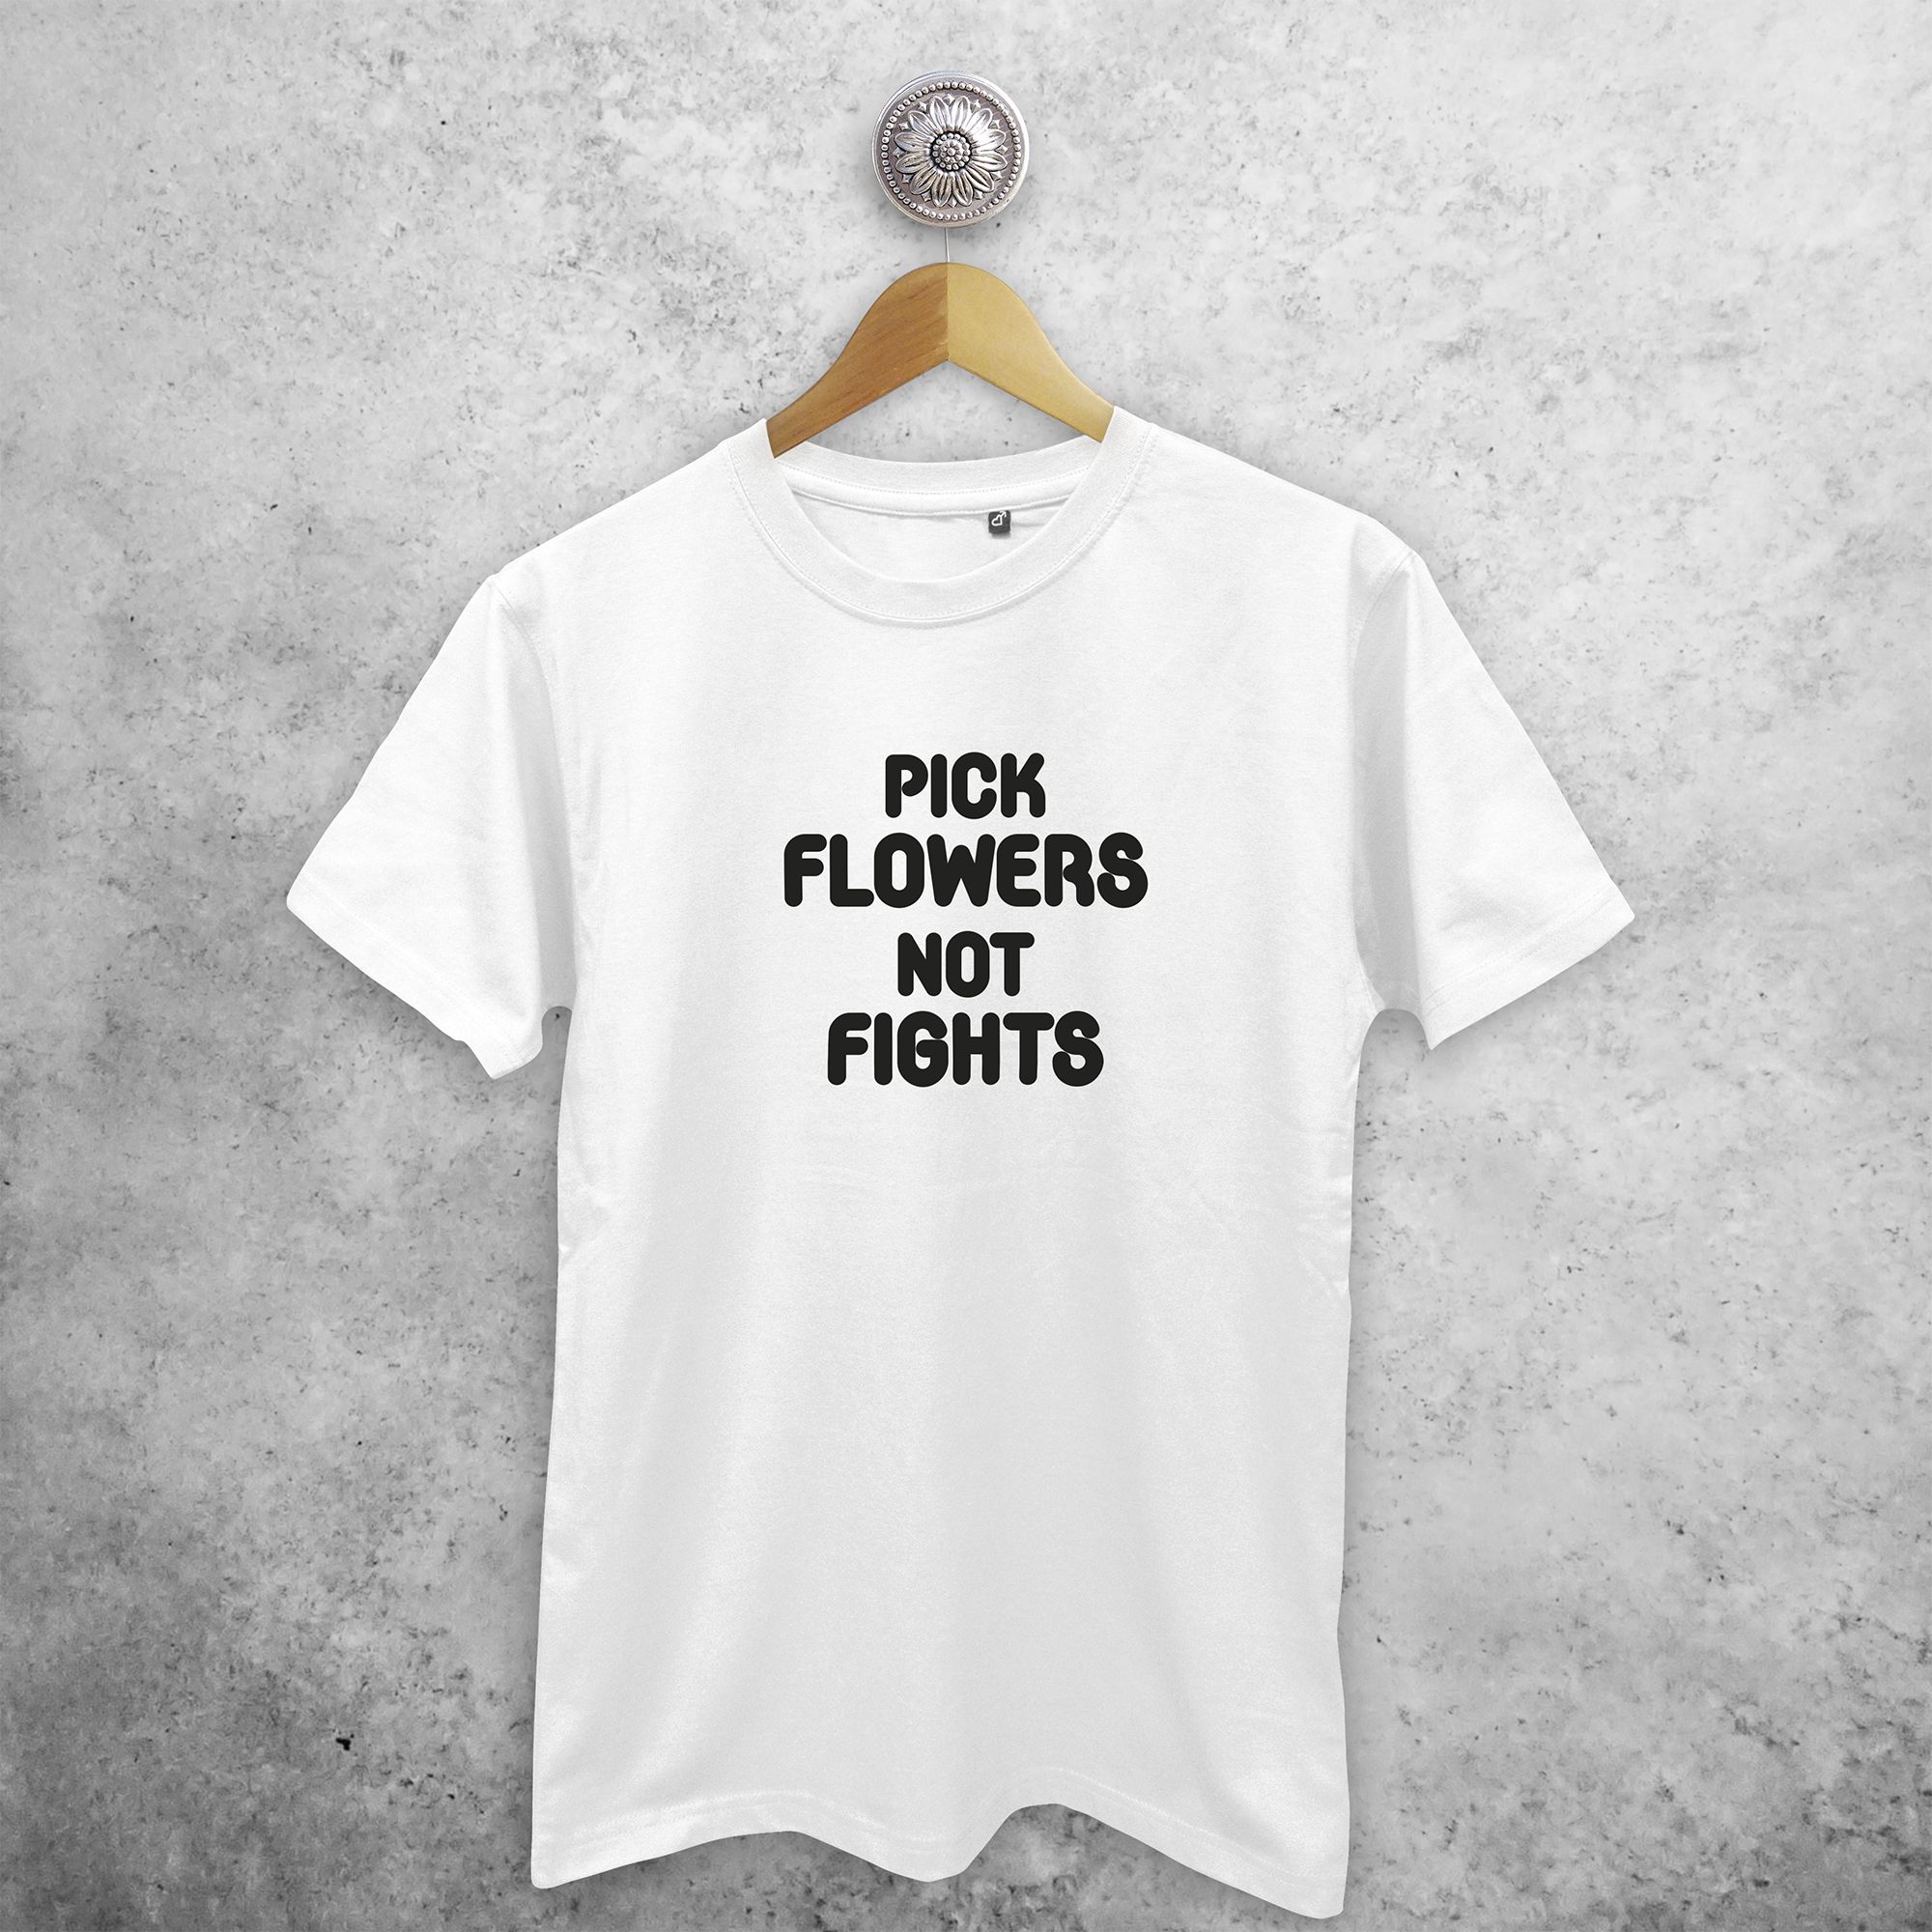 'Pick flowers, not fights' adult shirt